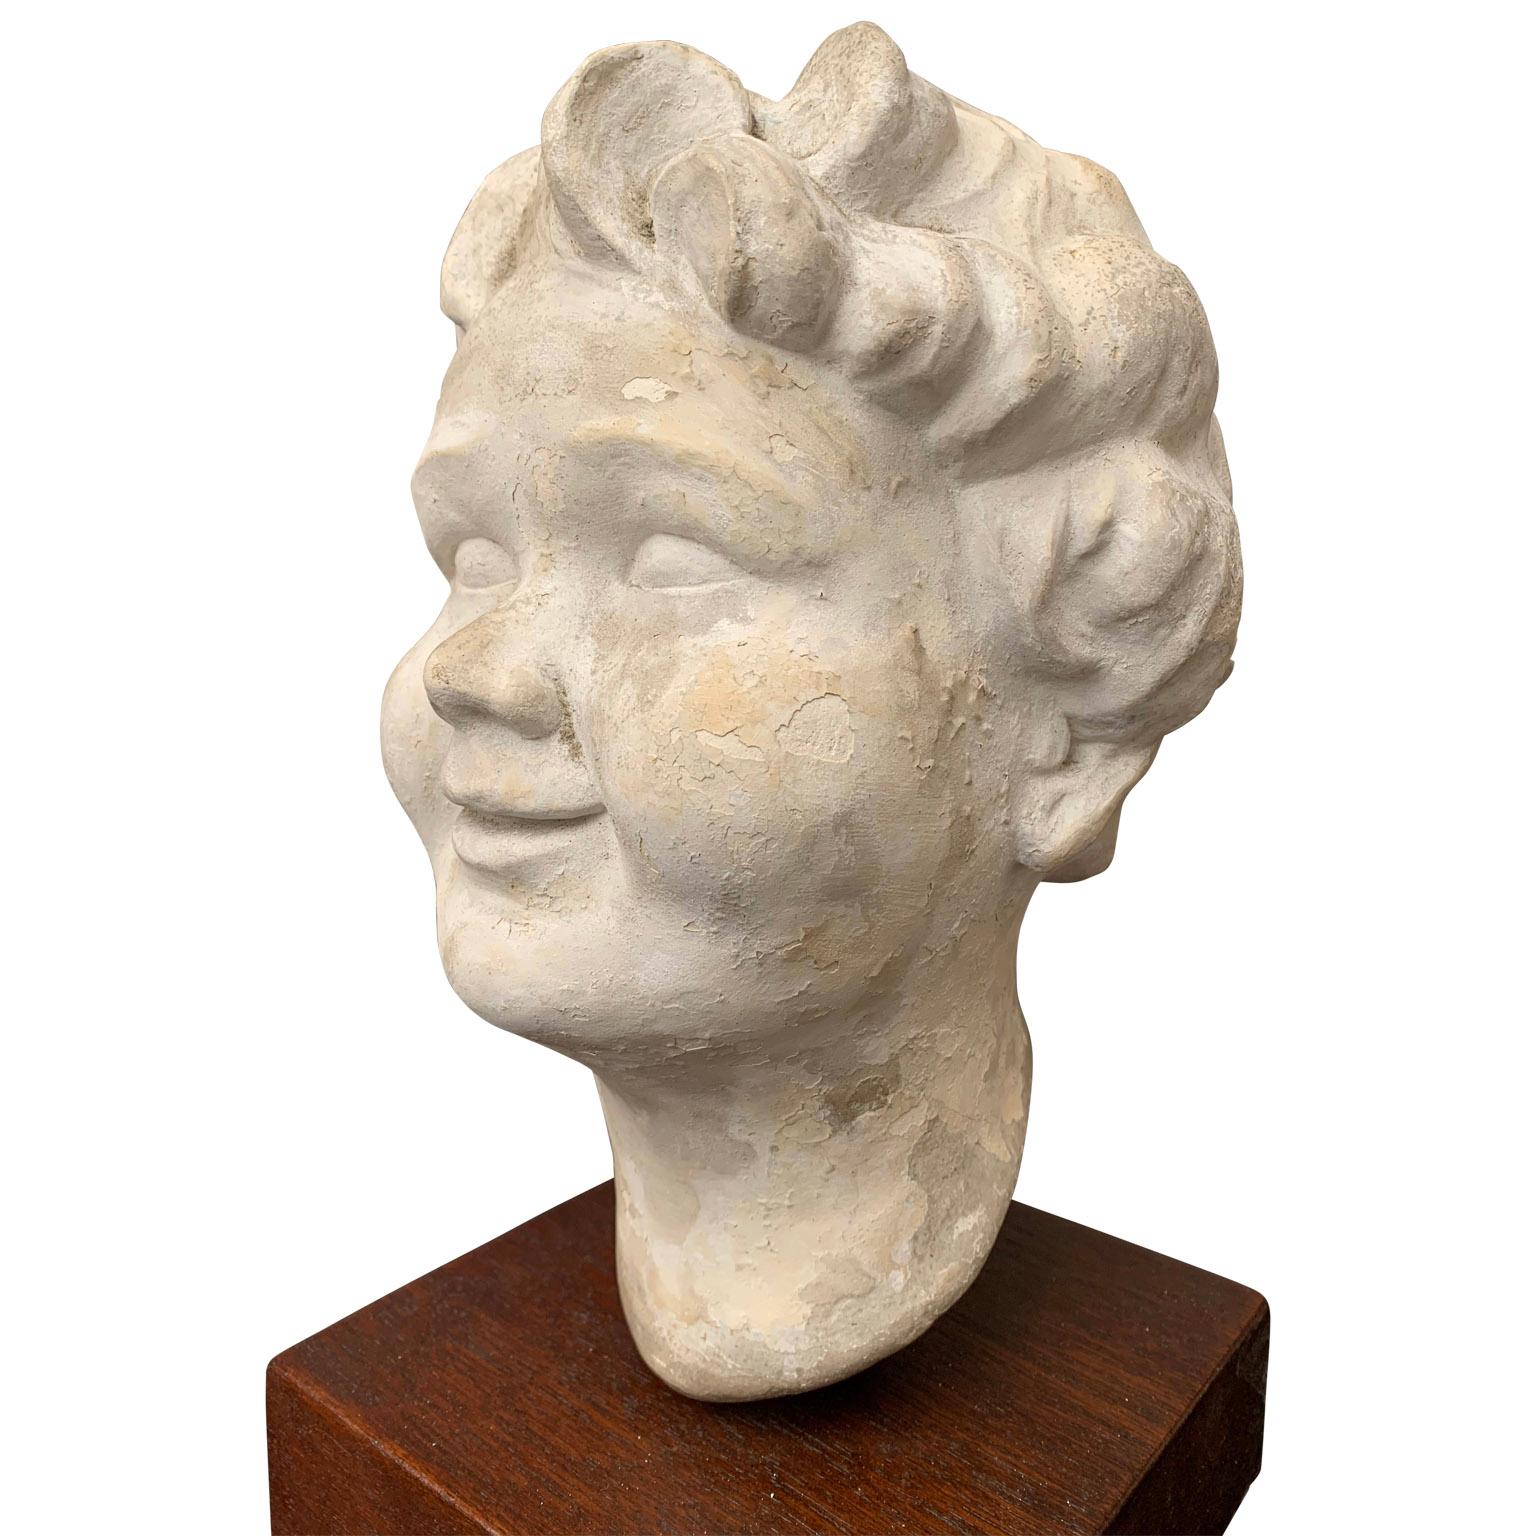 Plaster sculpture of putti's or Childs head on wooden stand

The sculpture is dated in the plaster with 